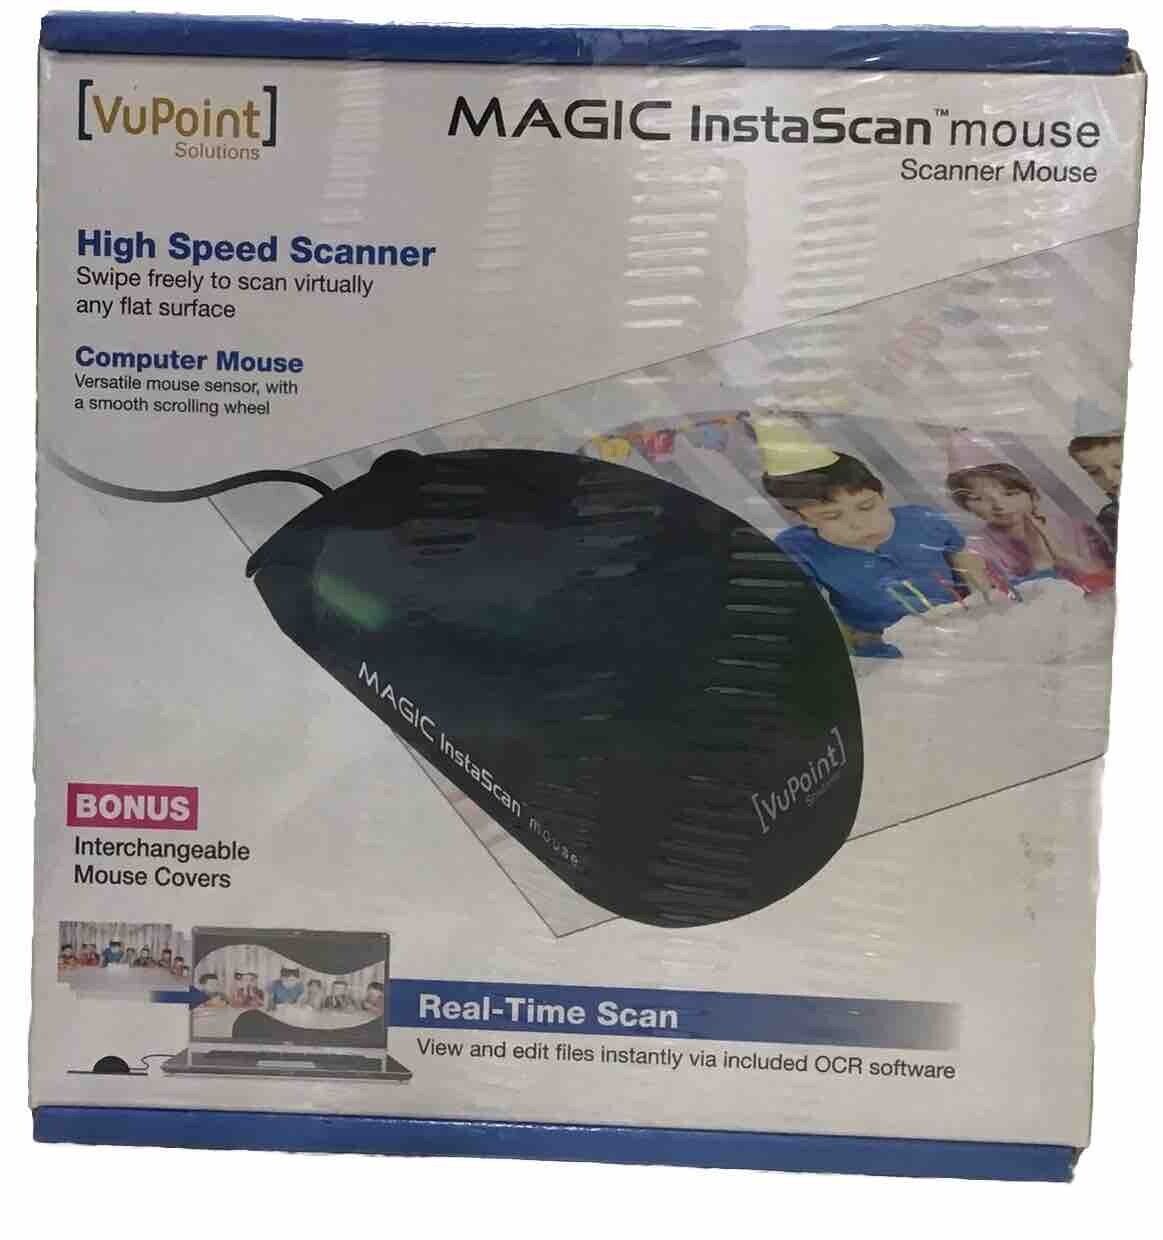 New Vupoint Magic InstaScan Mouse Scanning Mouse with Interchangeable Covers